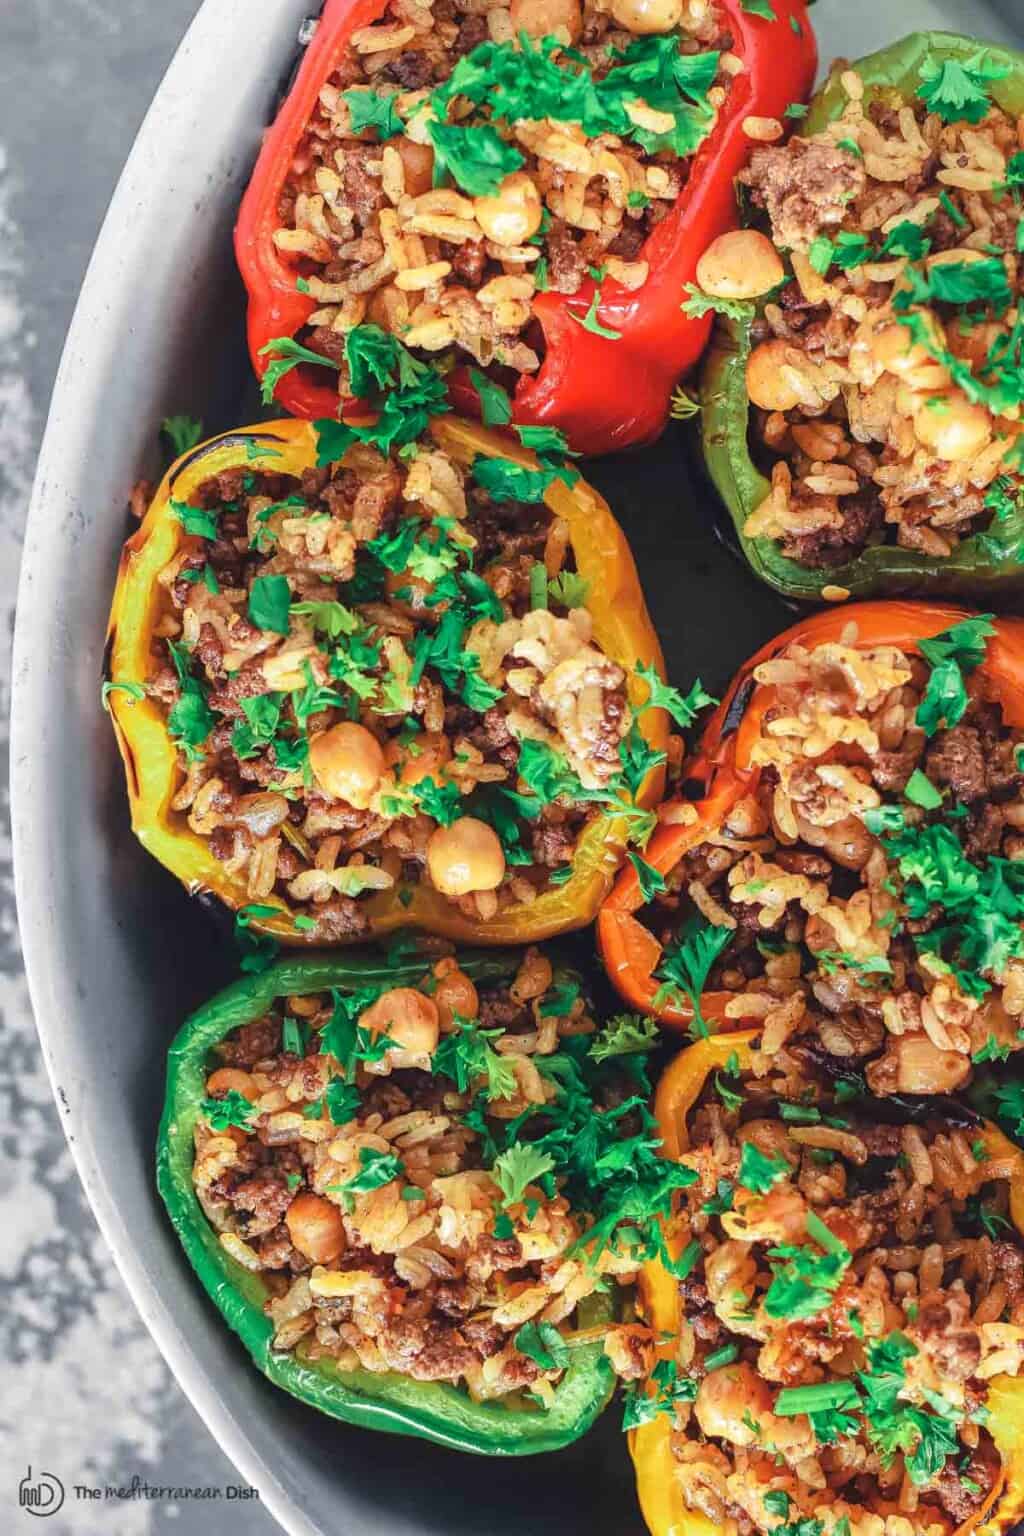 Greek Stuffed Bell Peppers with Rice, Chickpeas, Ground Beef, and Herbs in a Large Casserole Dish